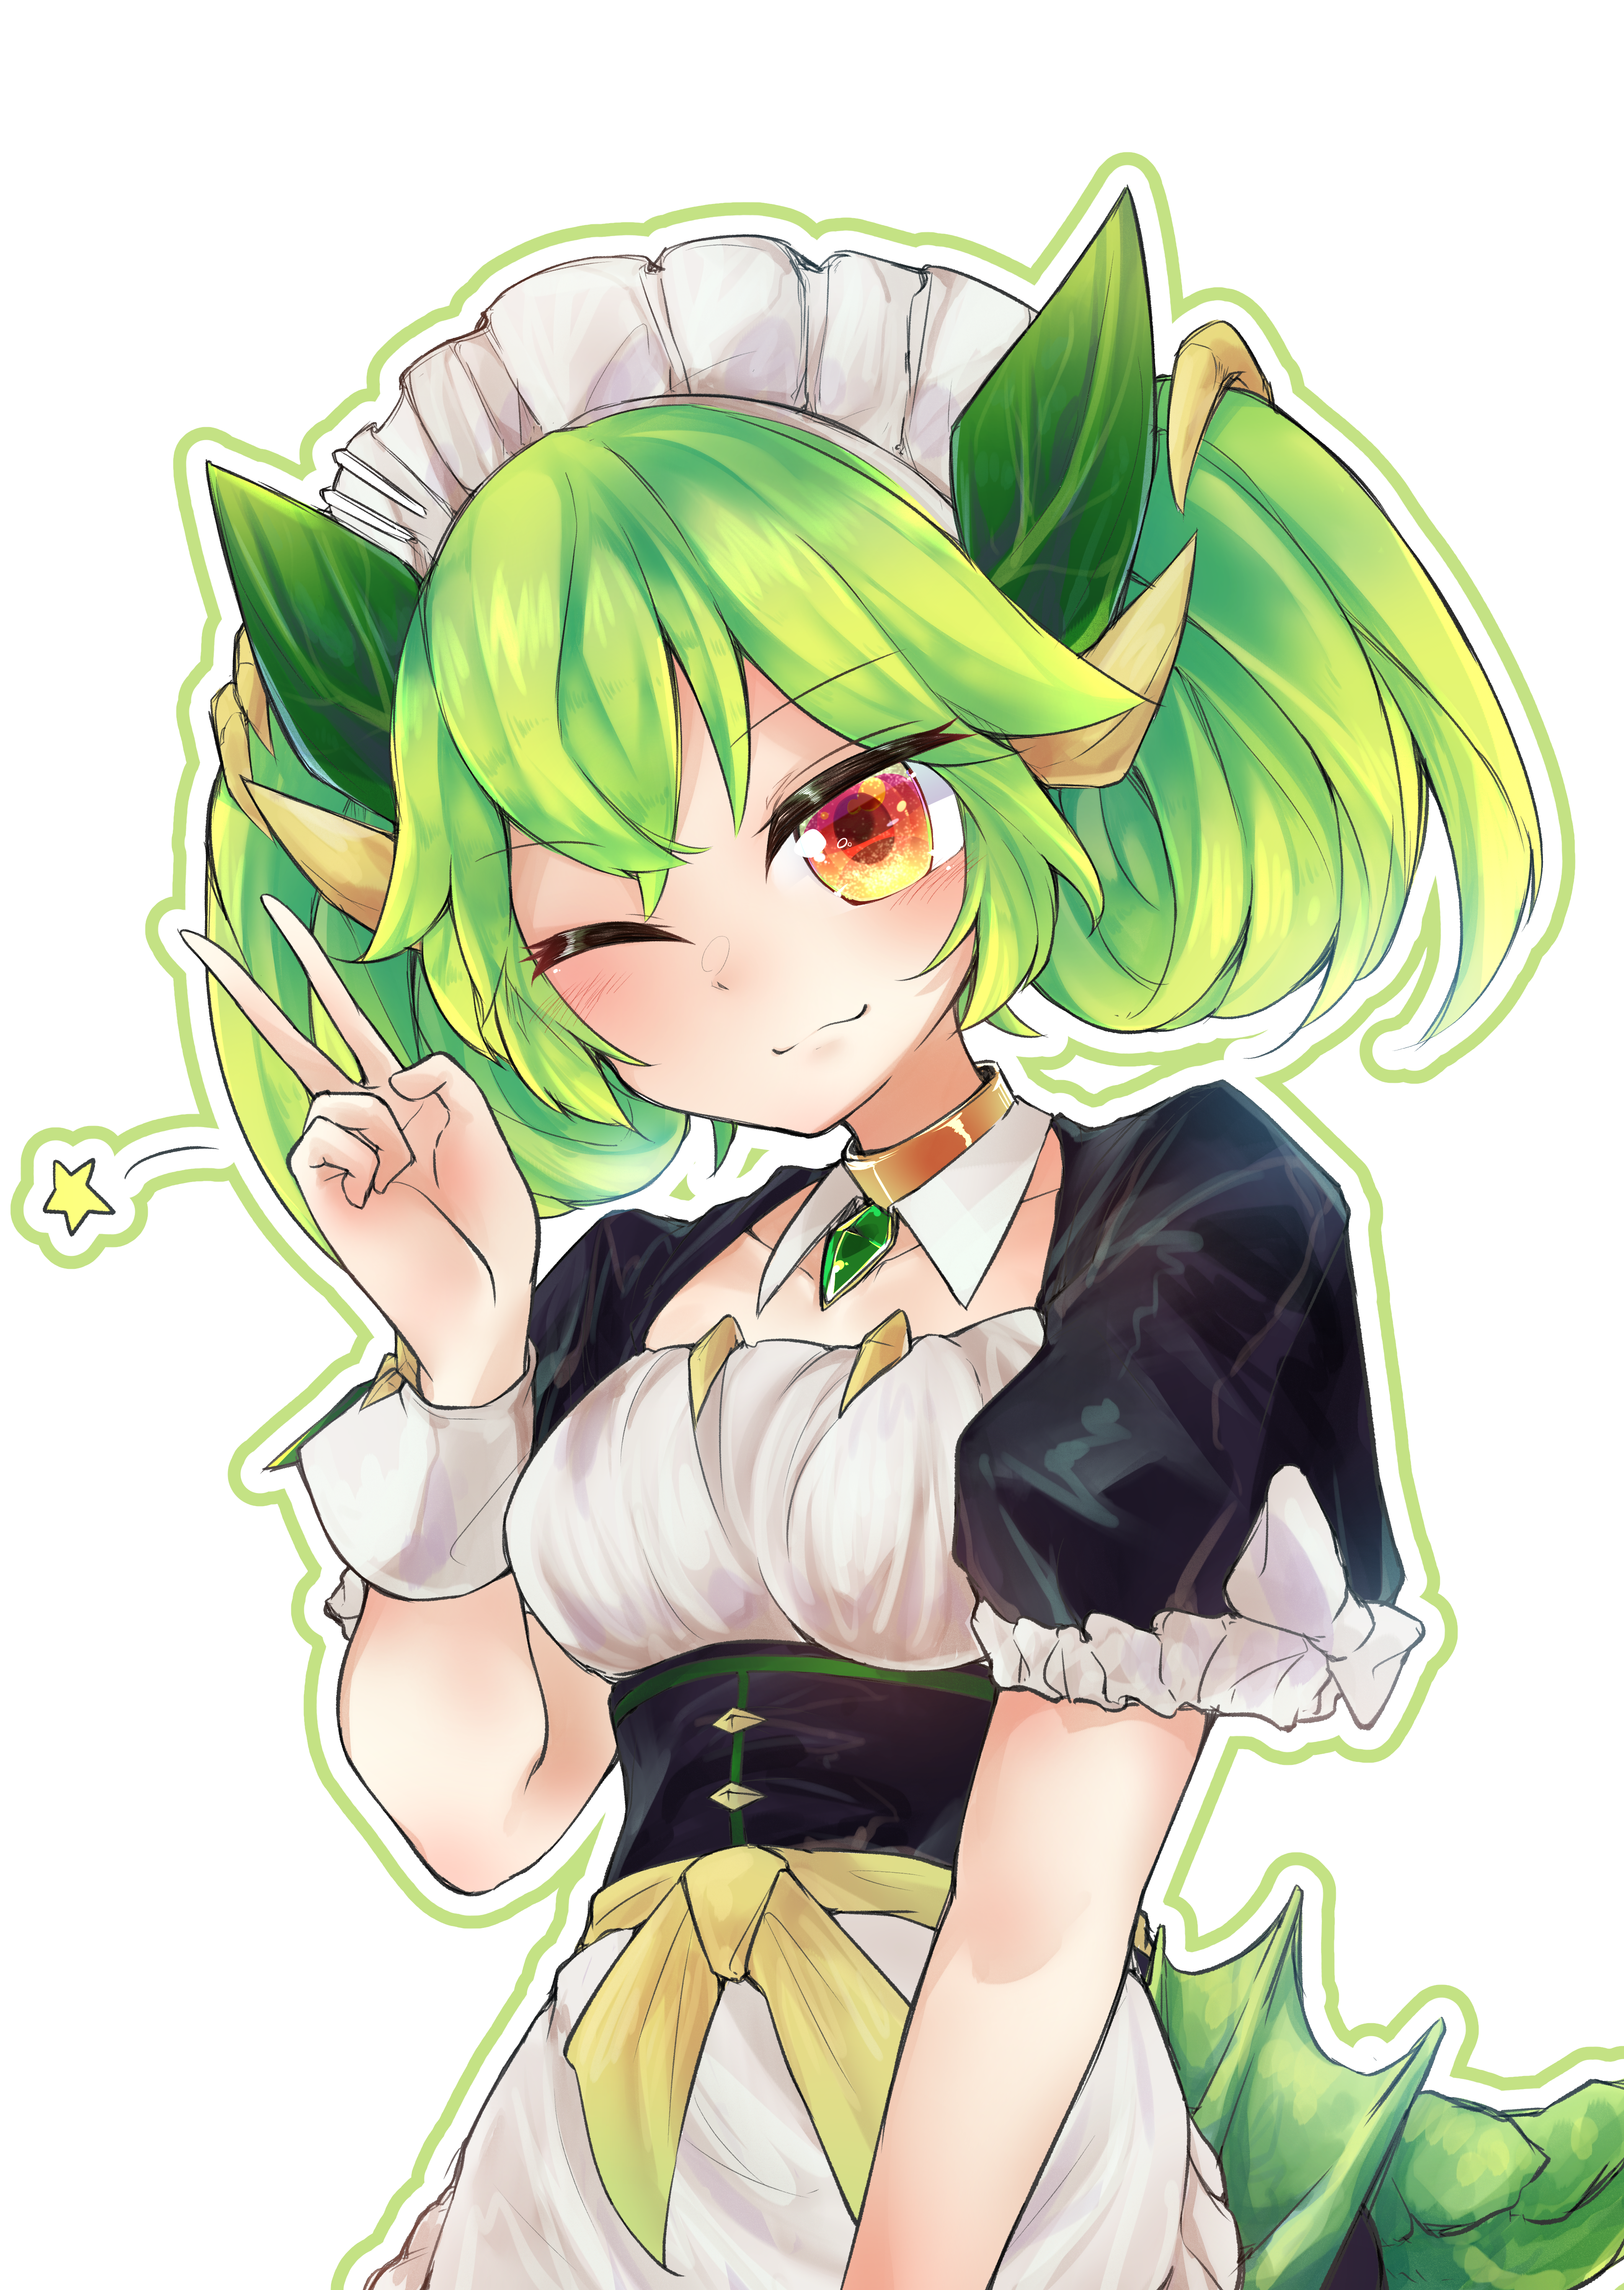 Anime Anime Girls Trading Card Games Yu Gi Oh Maid Maid Outfit Twintails Green Hair Parlor Dragonmai 4243x5983